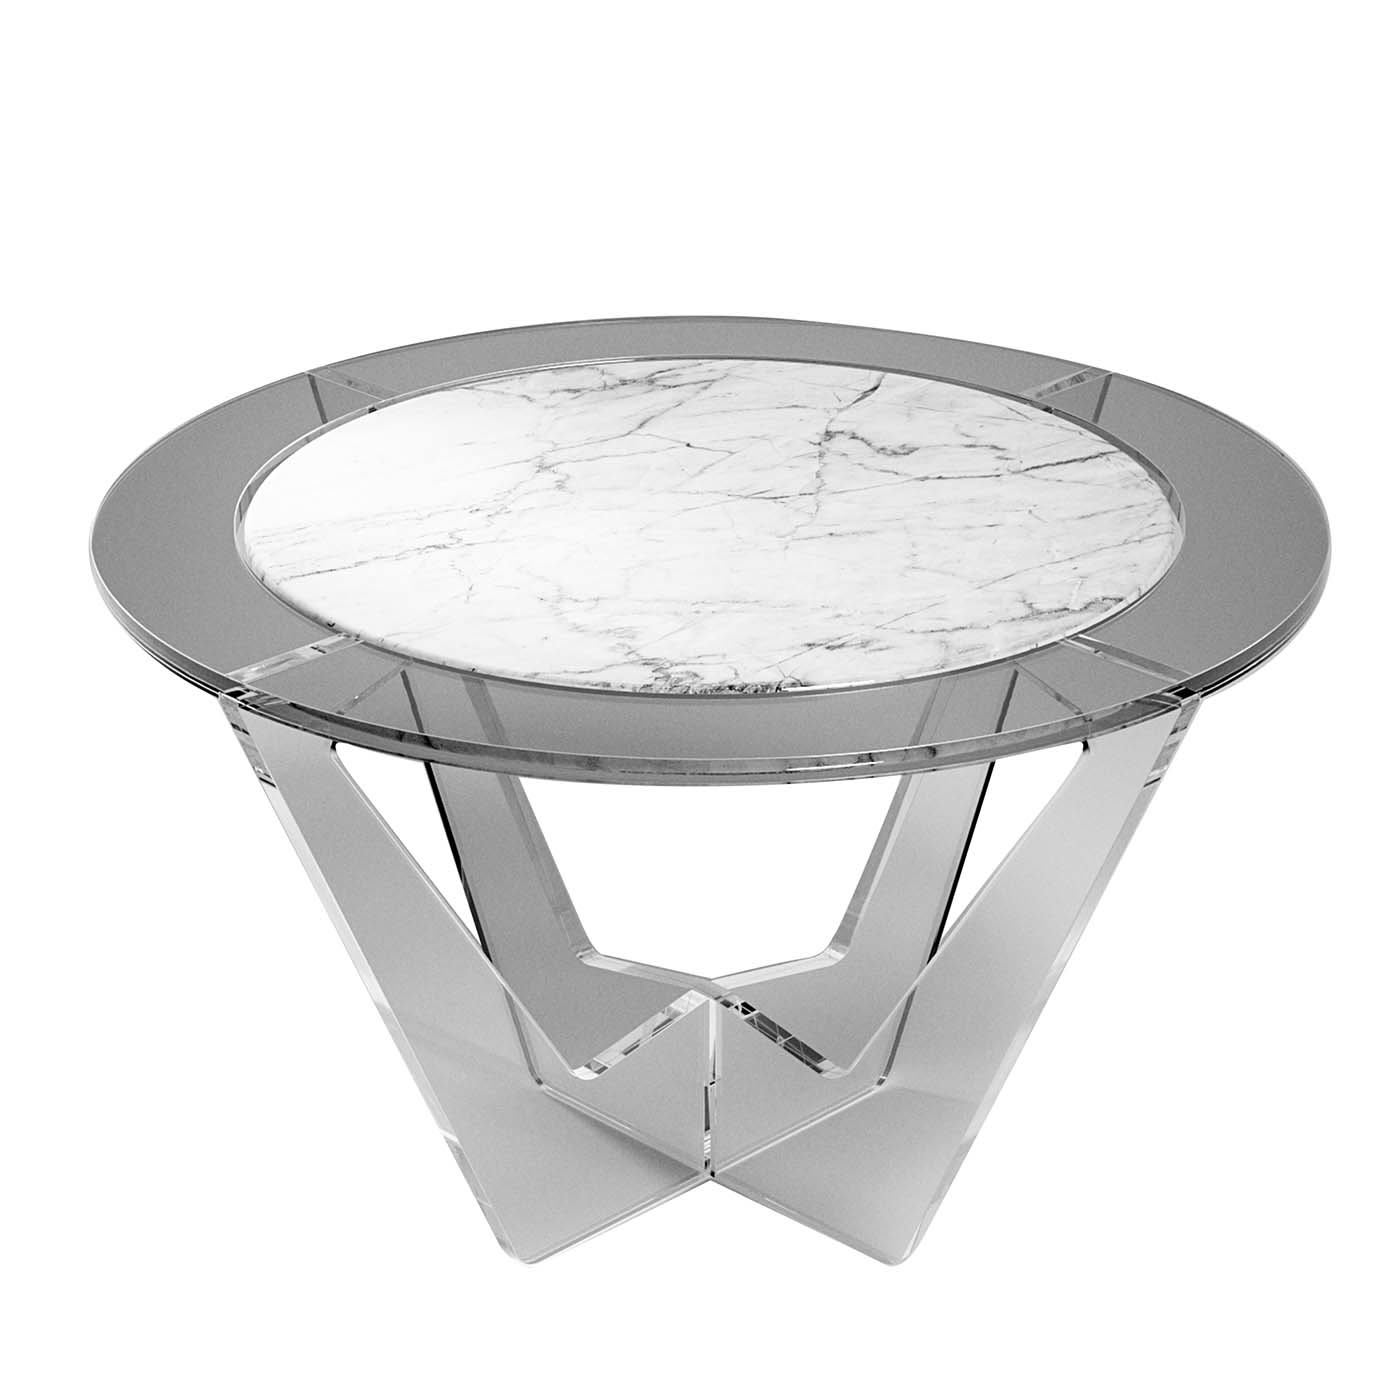 Hac Gray Round Coffee Table with White Carrara Marble Top - Madea Milano